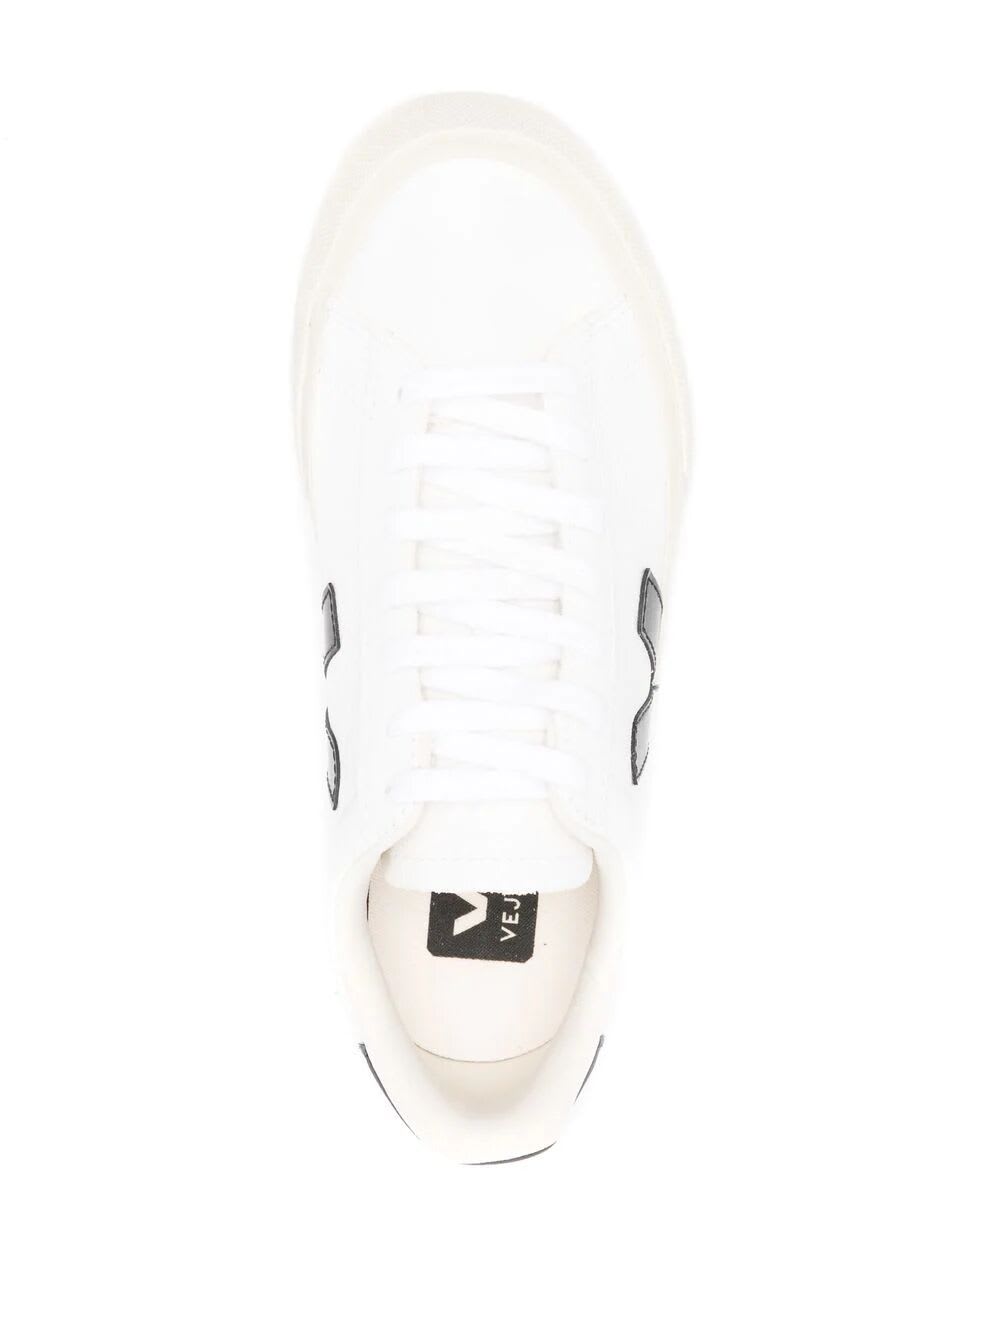 Shop Veja Campo Sneakers In Extra White Black